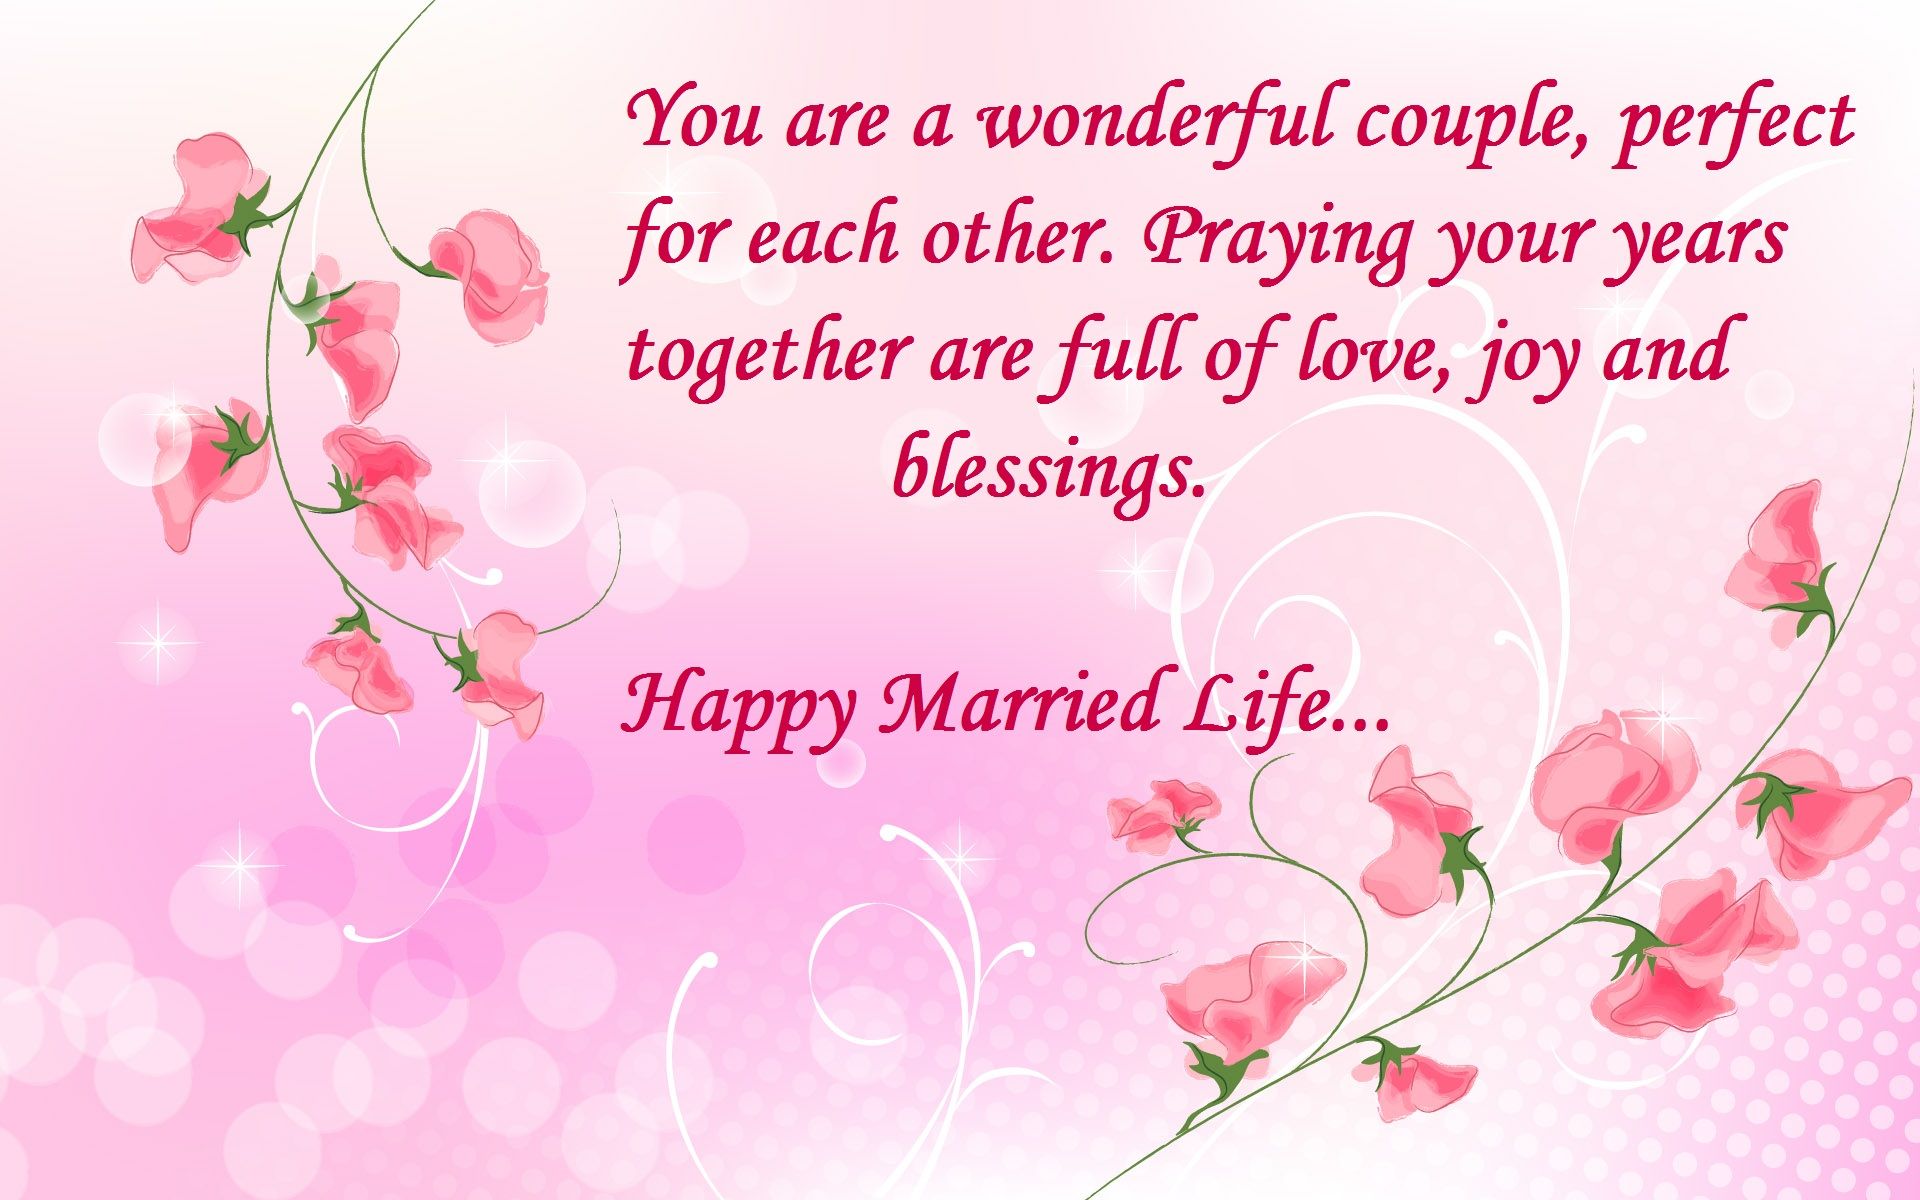 Marriage Wishes Wallpapers - Wallpaper Cave